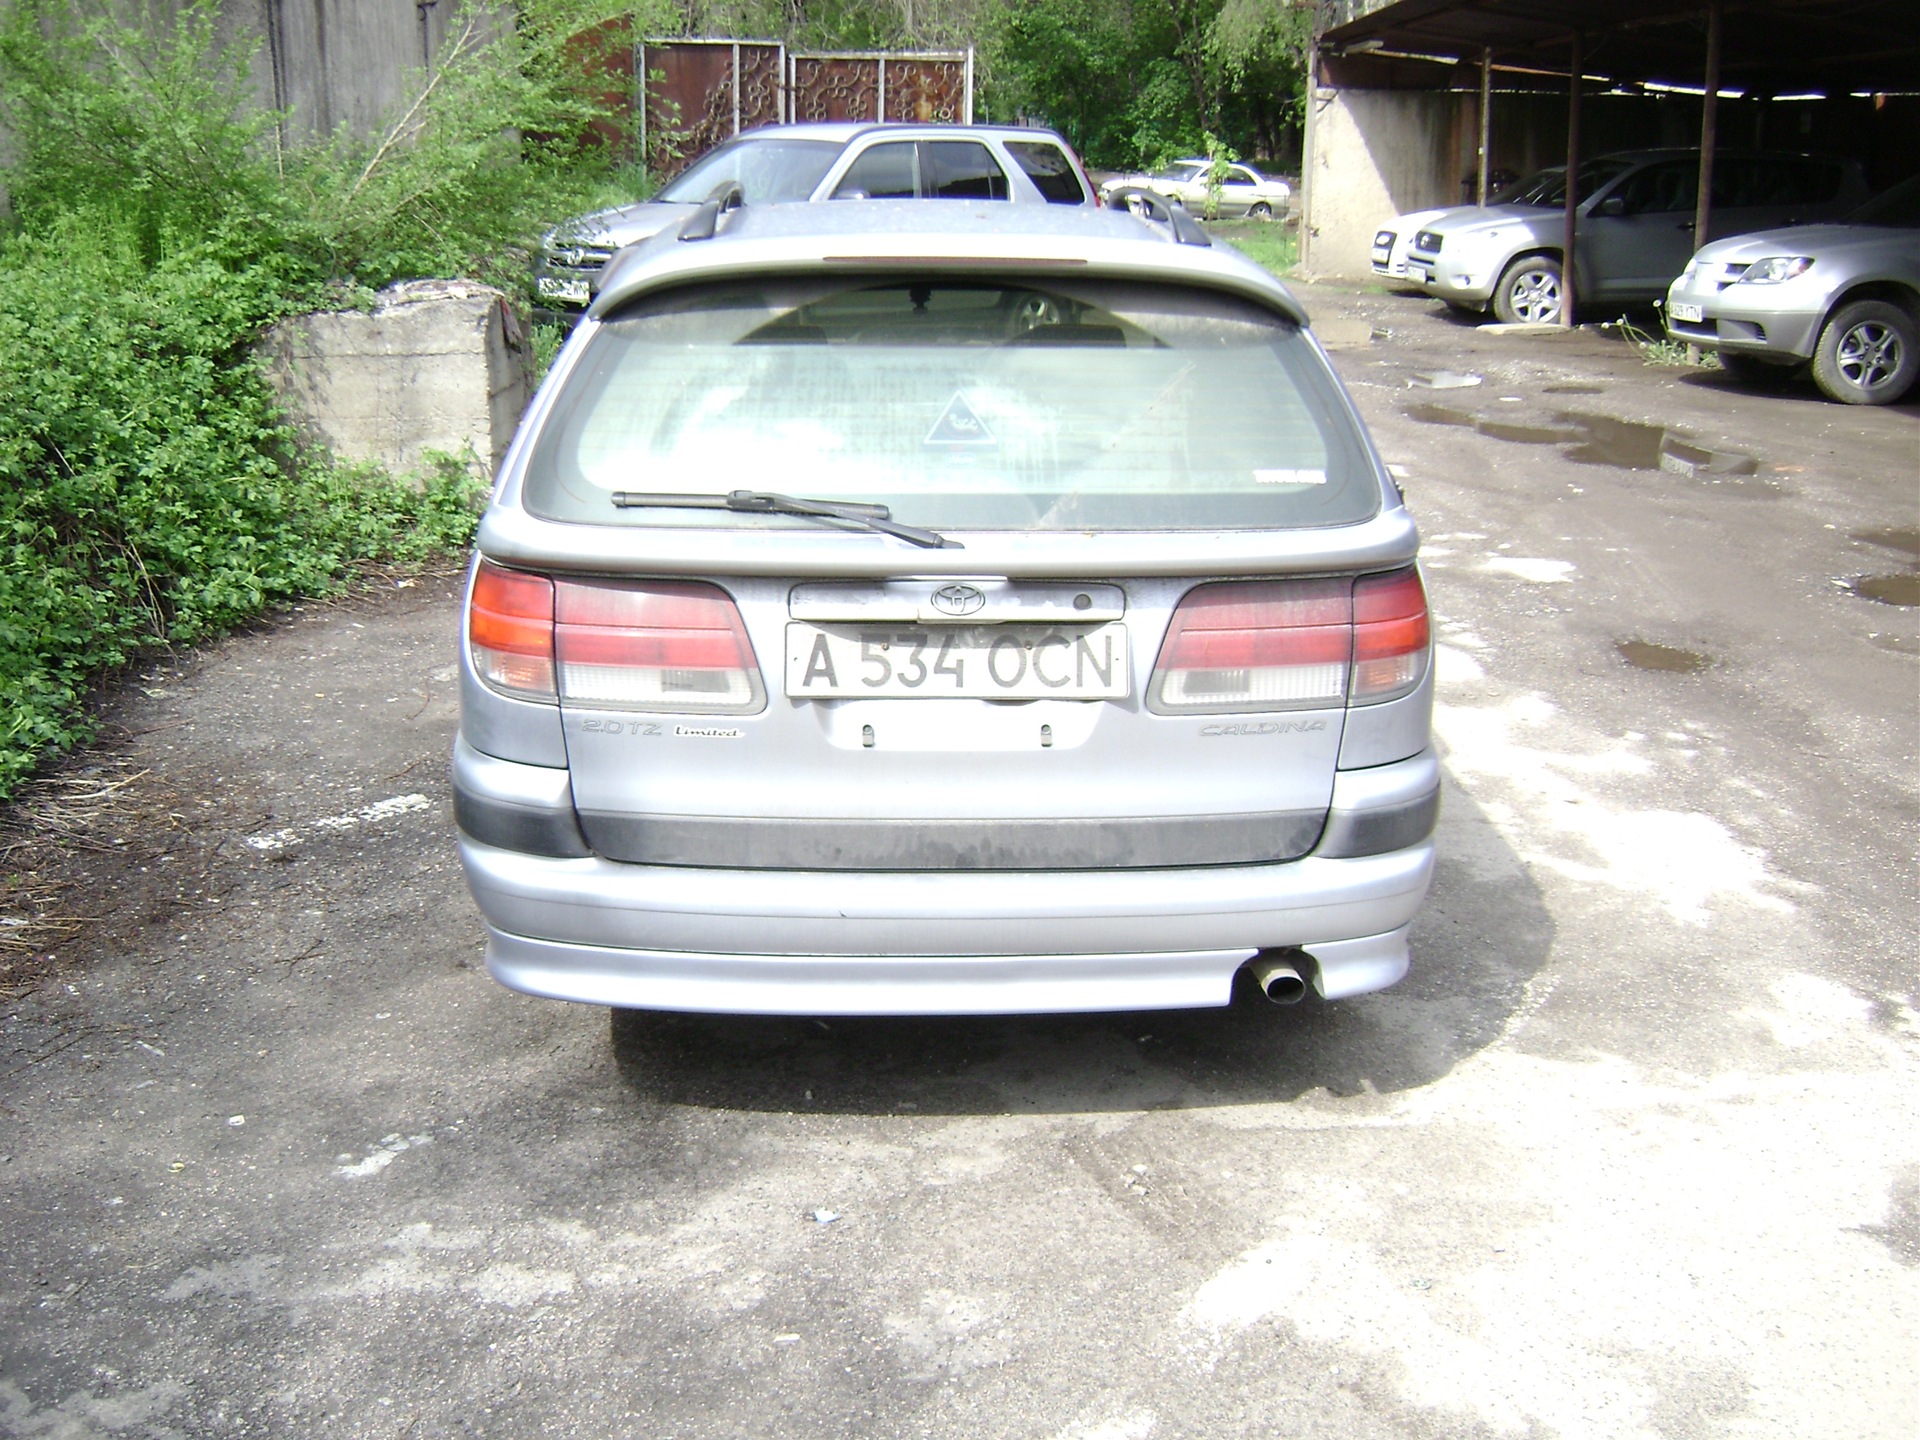 the painter of me is still the one   install - Toyota Caldina 20 l 1997